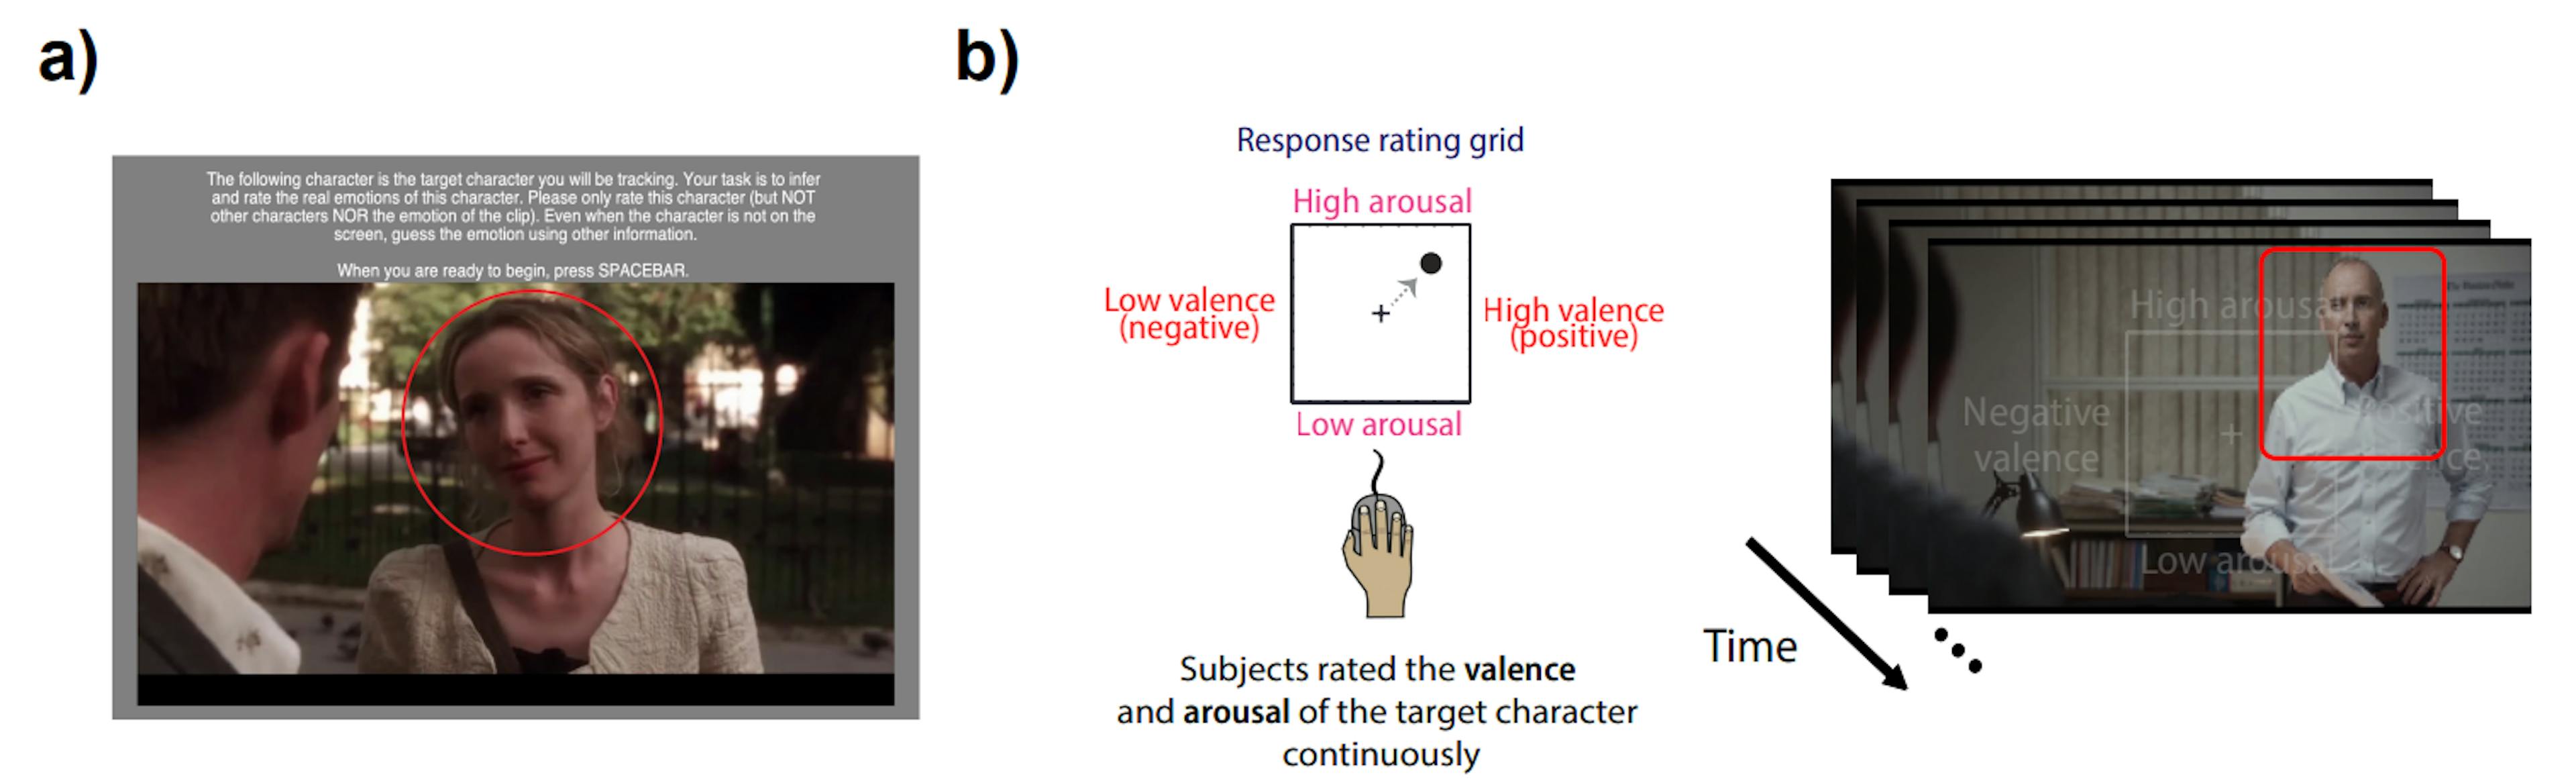 Figure 3. User interface used for video annotation. a) Participants were first shown the target character and were reminded of the task instructions before the start of each video. b) The overlayed valence and arousal grid that was present while observers annotated the videos. Observers were instructed to continuously rate the emotion of the target character in the video in real-time. If observers did not move their mouse for more than 10 seconds, the response rating grid would flash to remind the observer to continuously rate the emotion.